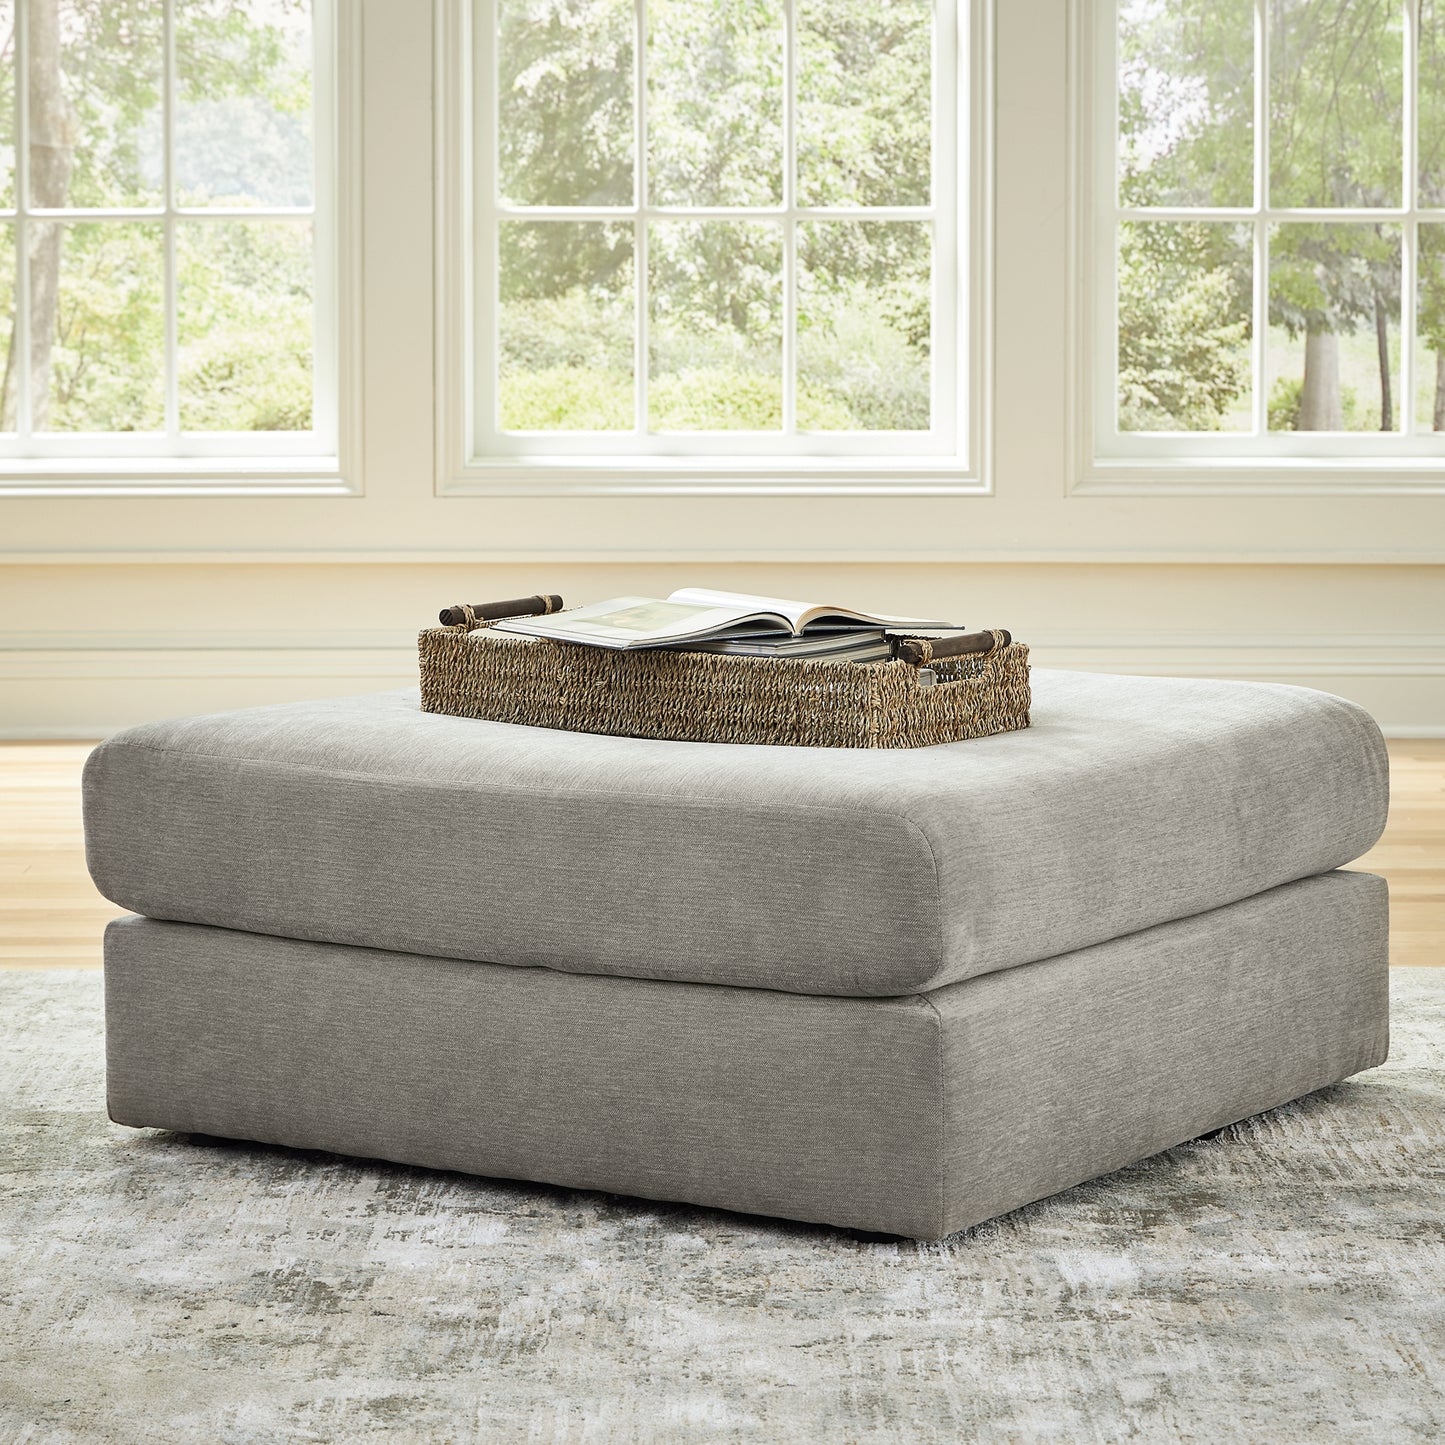 Avaliyah 4-Piece Sectional with Ottoman Signature Design by Ashley®